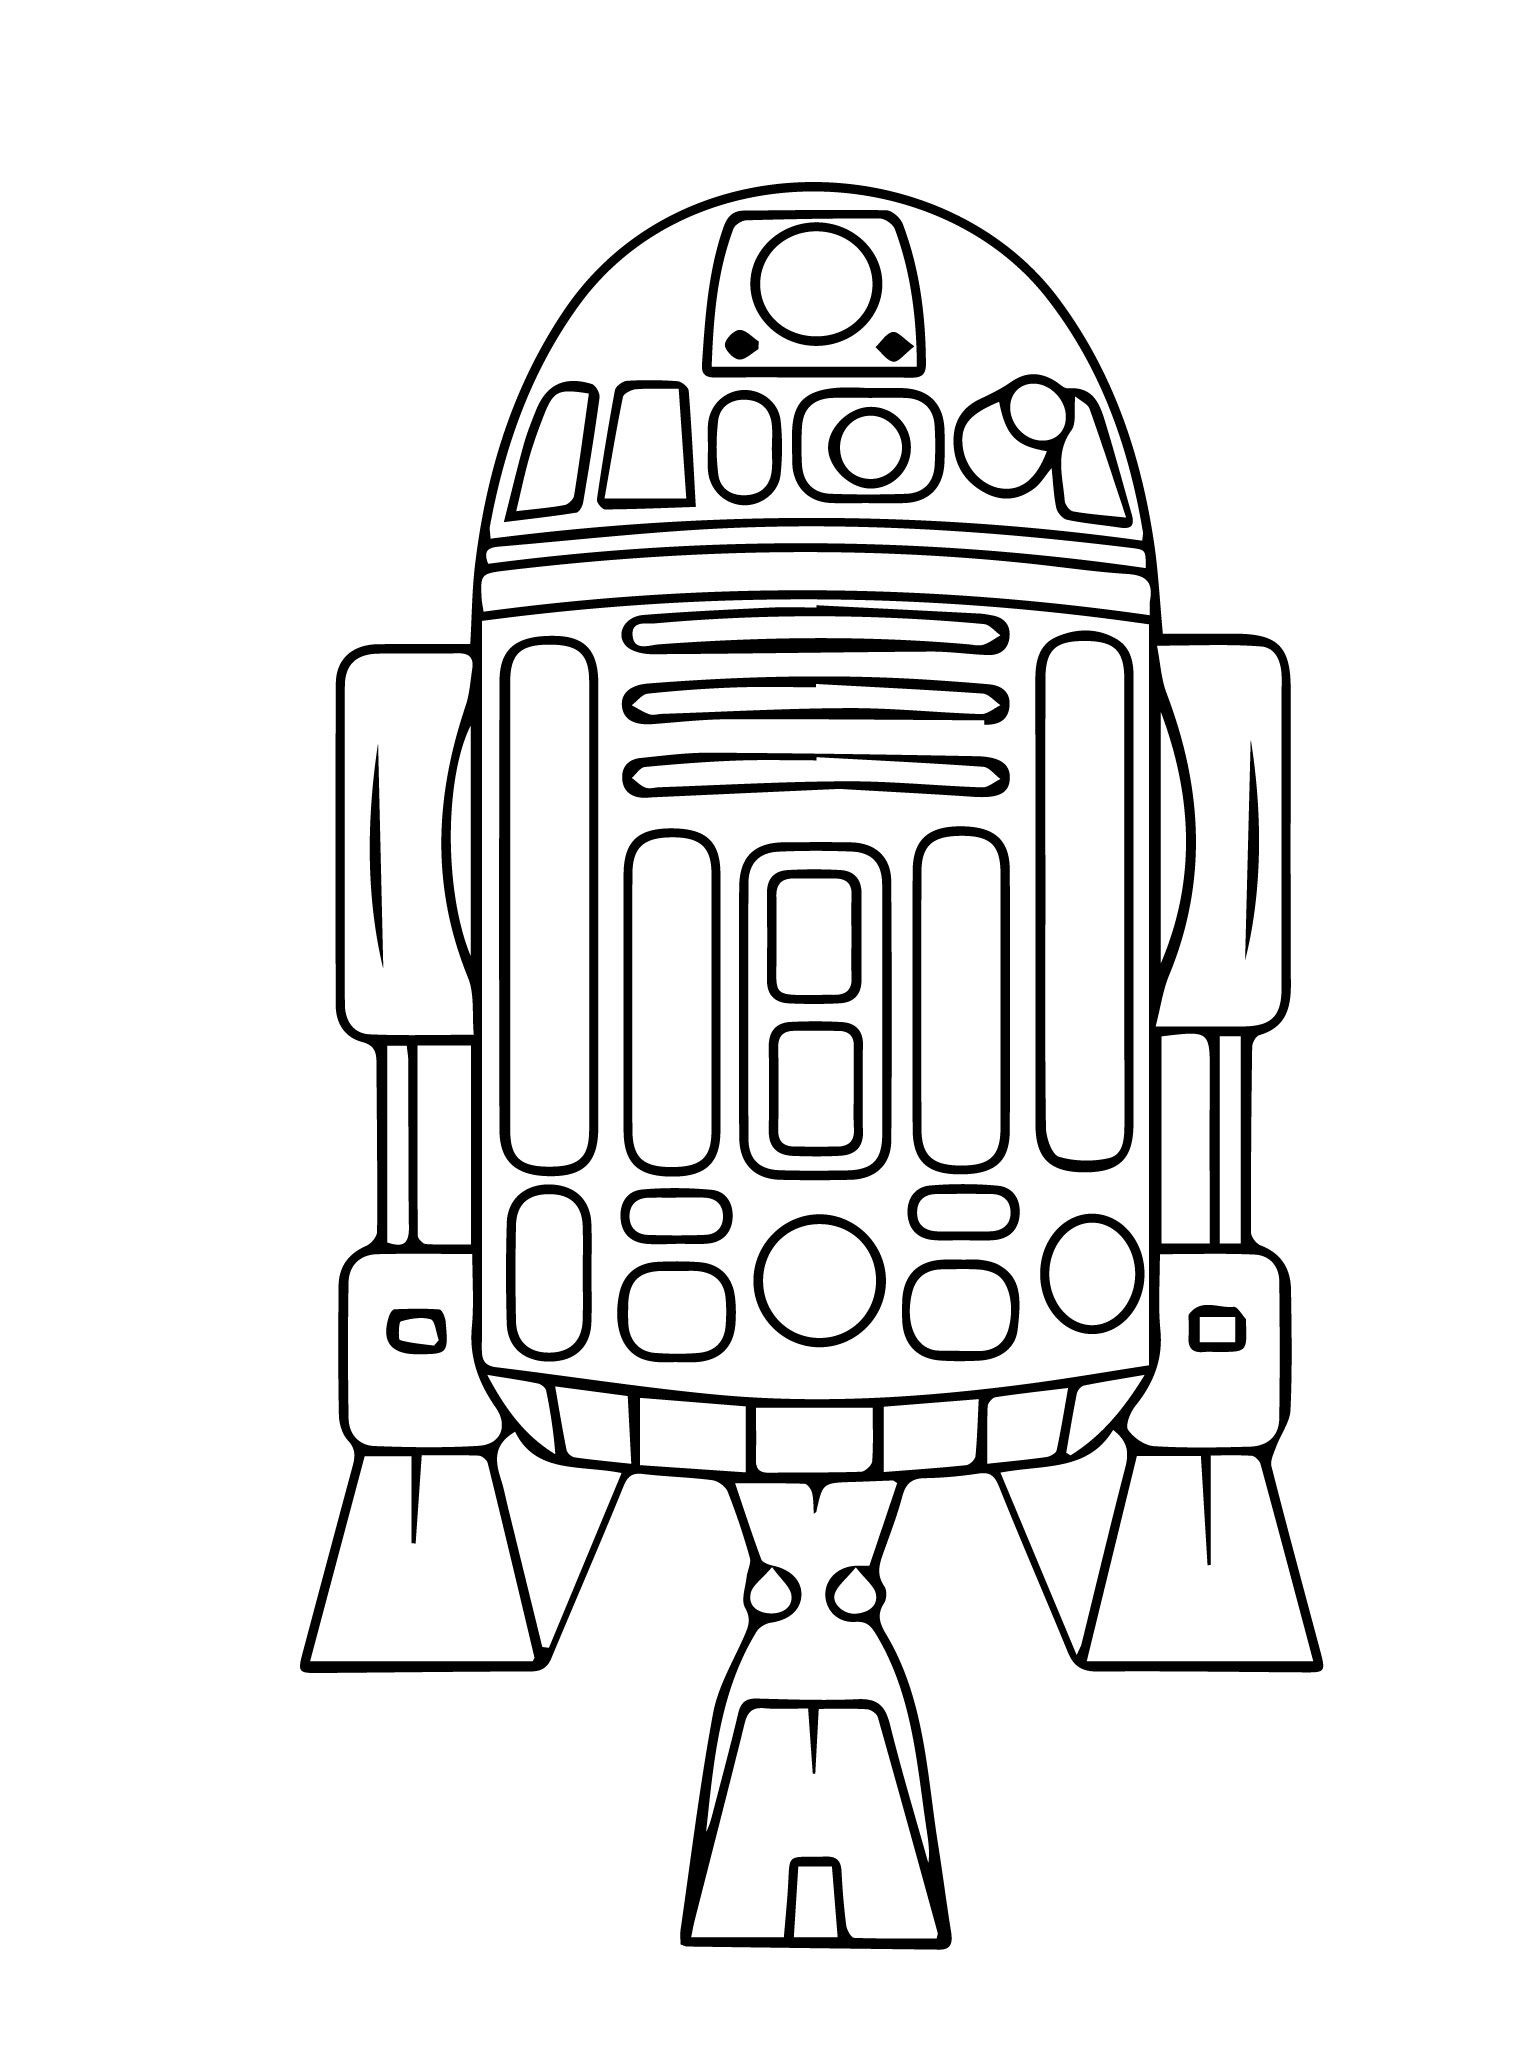 astromech-droid-r2-d2-coloring-page-free-printable-coloring-pages-for